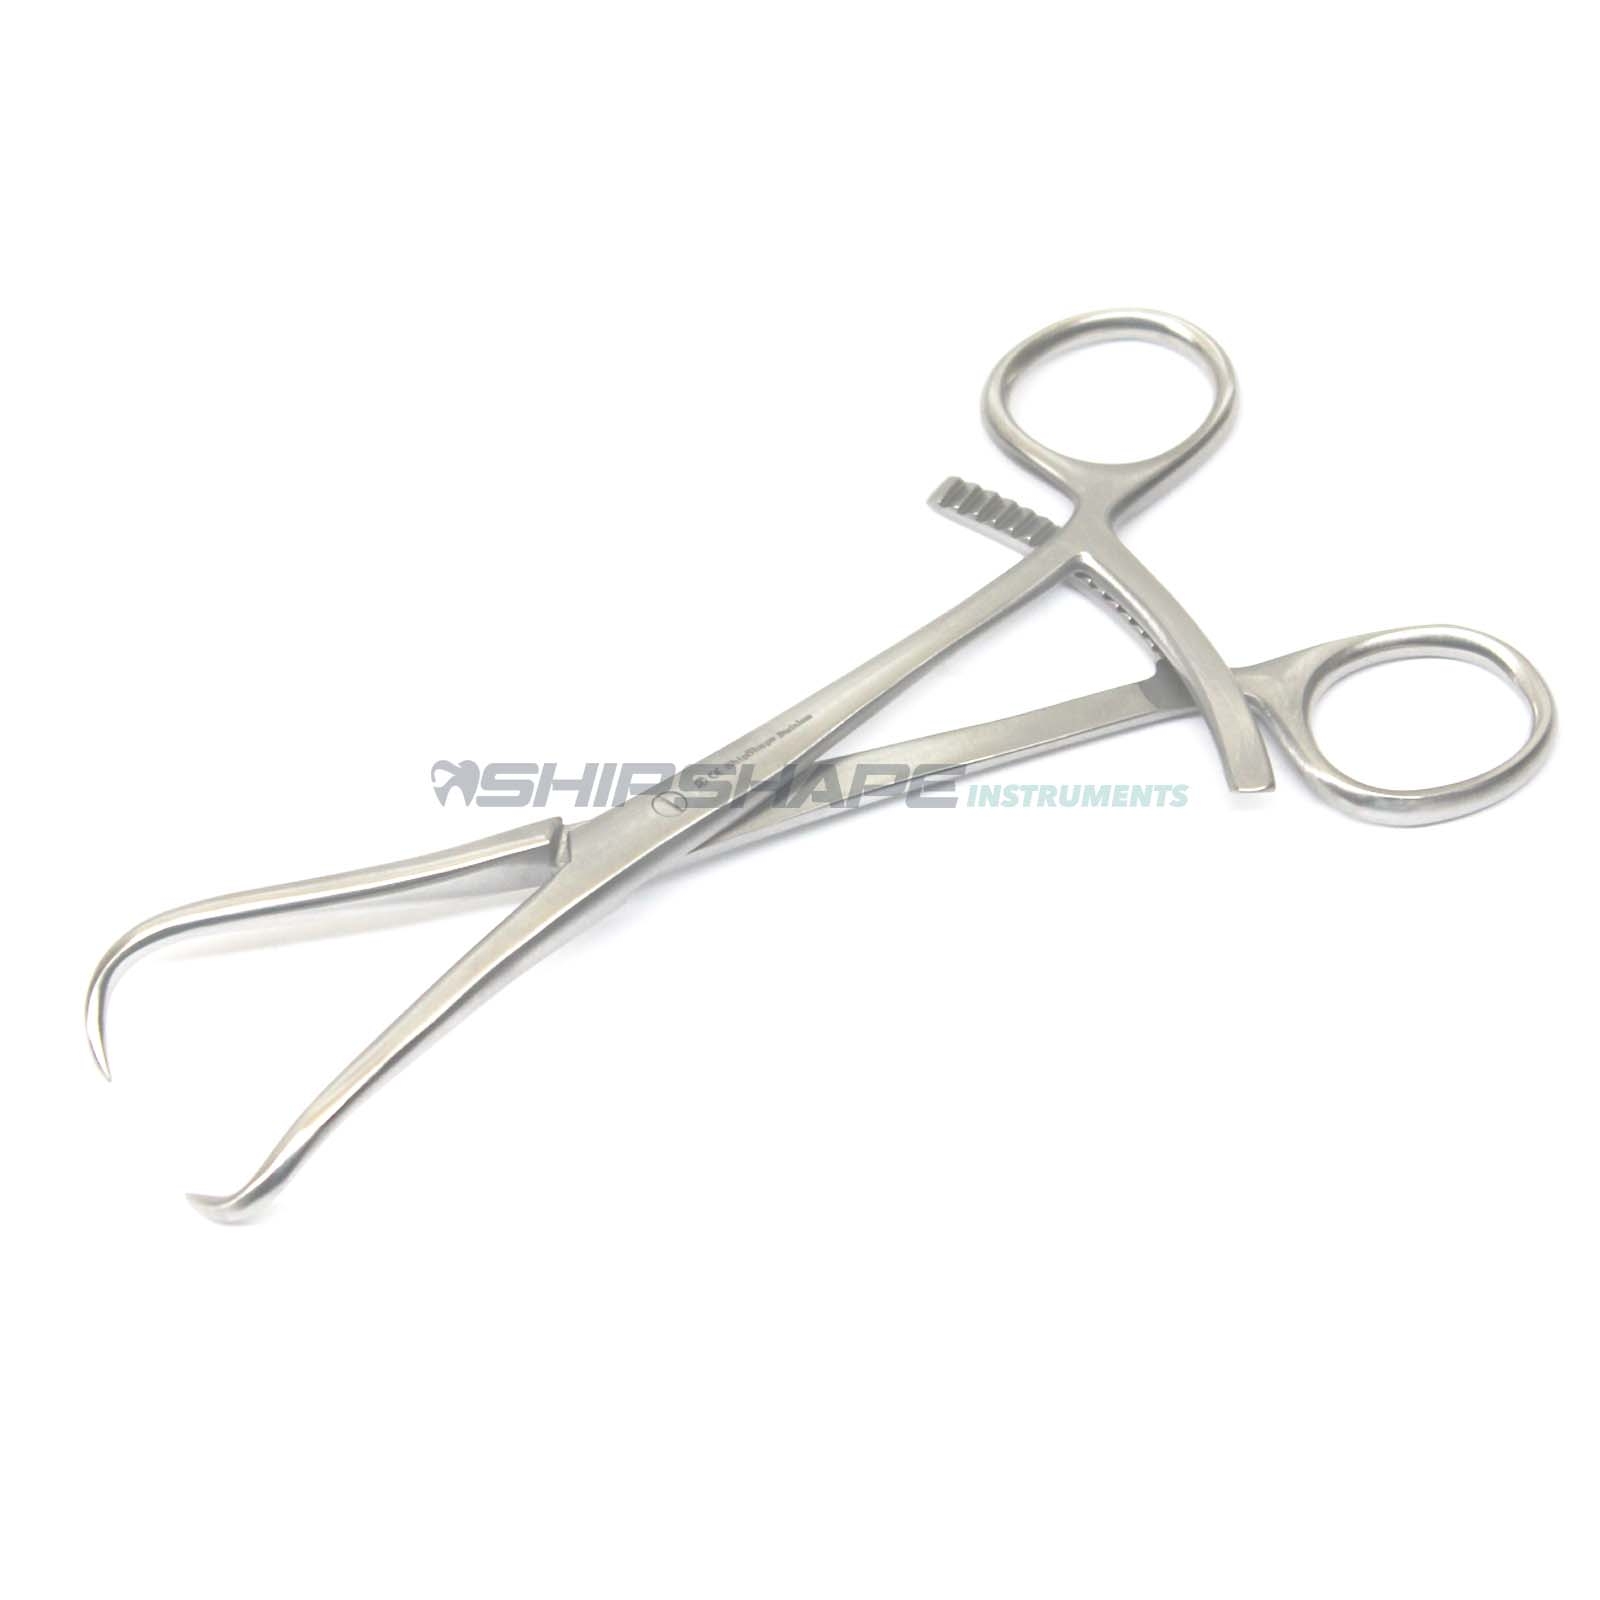 Orthopedic Bone Reduction Clamp Stainless Steel Instruments 8"-1435